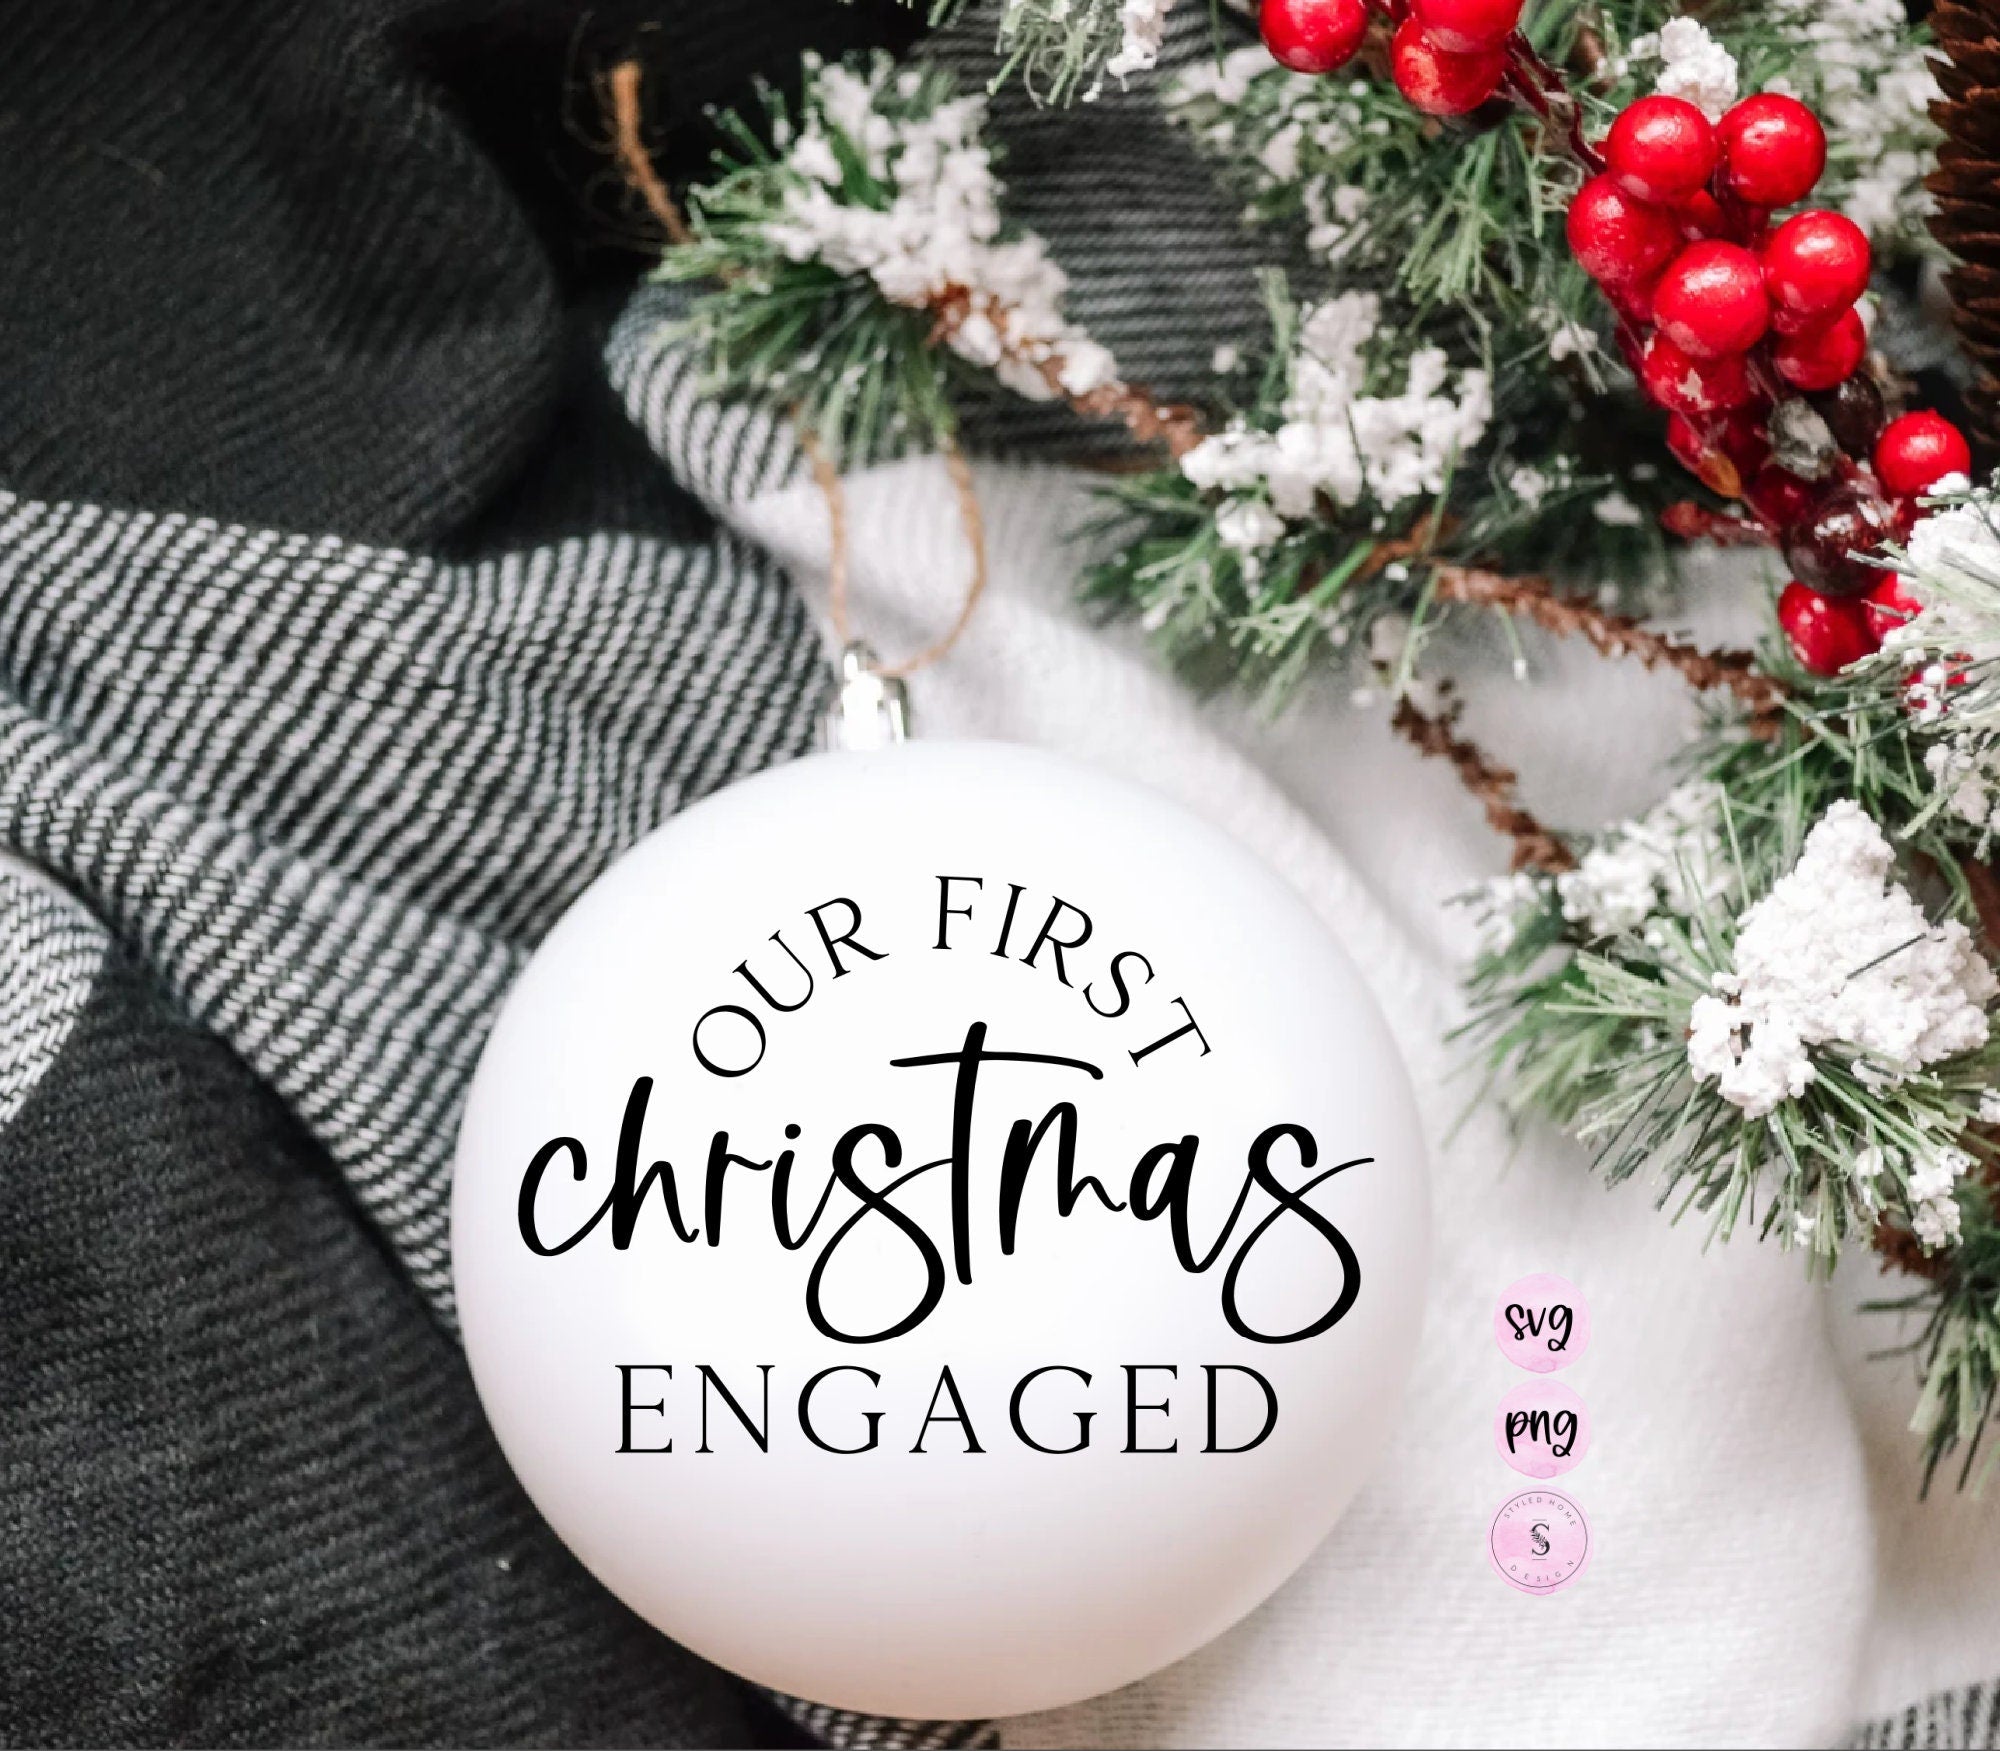 Our First Christmas Engaged SVG, Christmas Engagement Ornament, SVG, Team Nice, Christmas, Svg Cut File, Cricut  PNG Sublimation